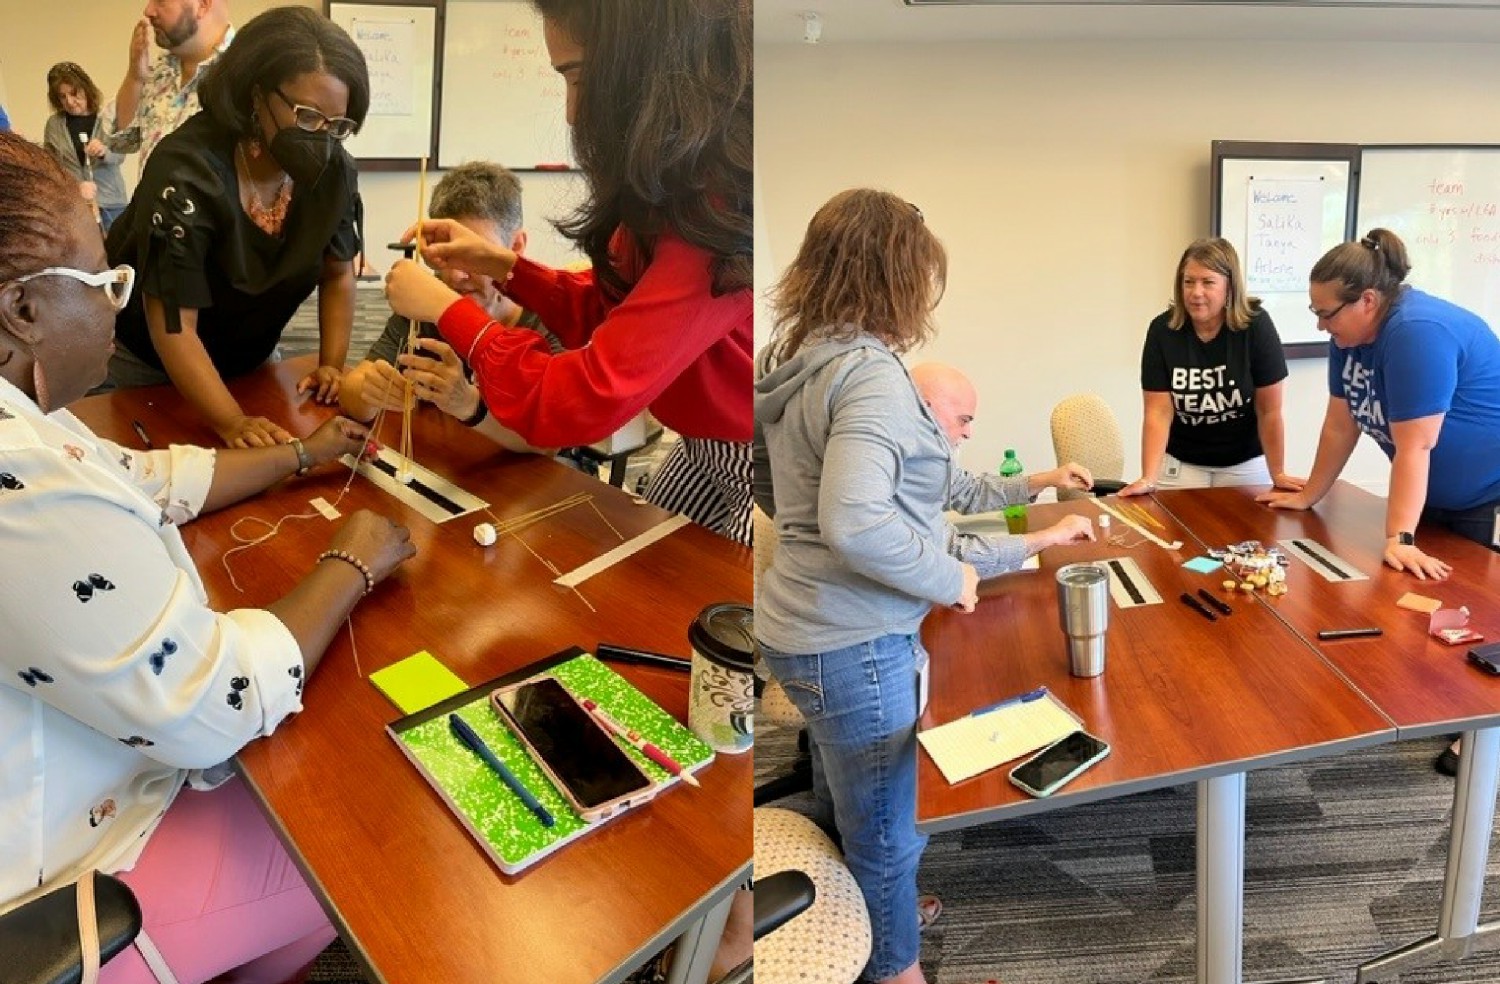 Our teammates build deeper connections and problem solving skills though a little creative competition. 